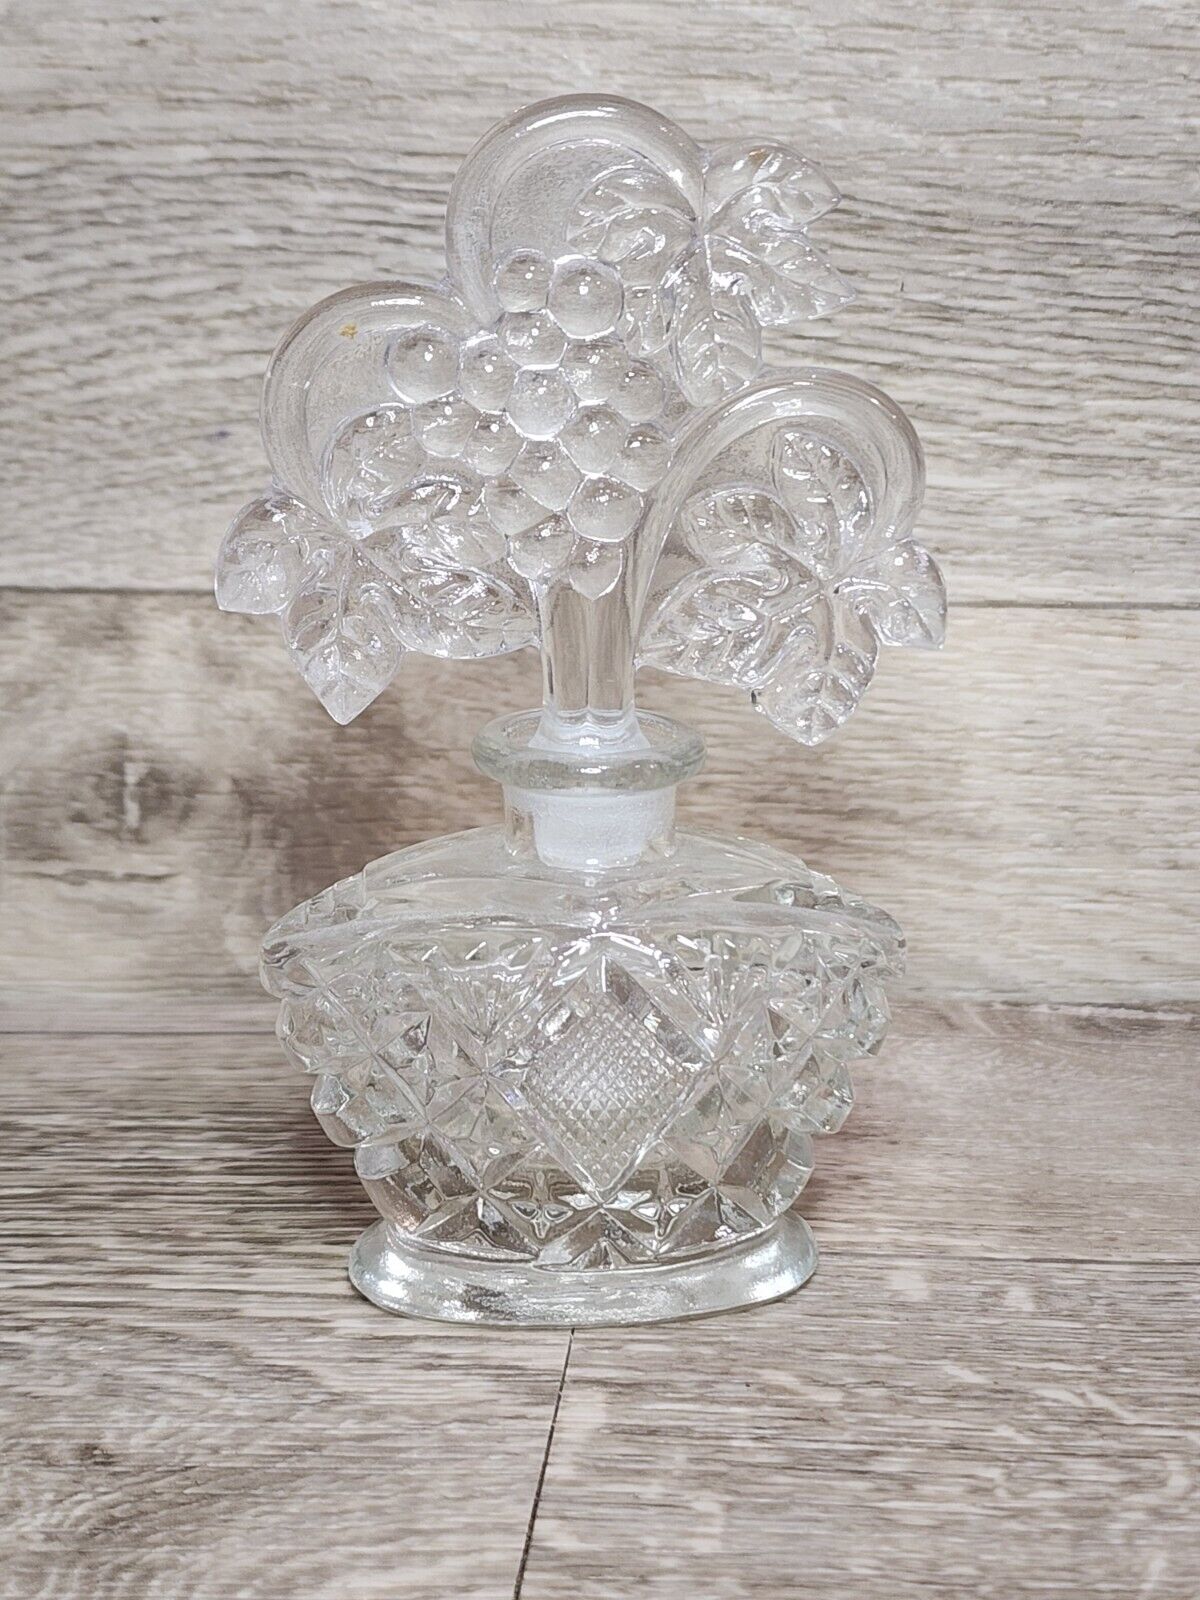 Imperial Glass Grapes Vintage Perfume Bottle w Stopper